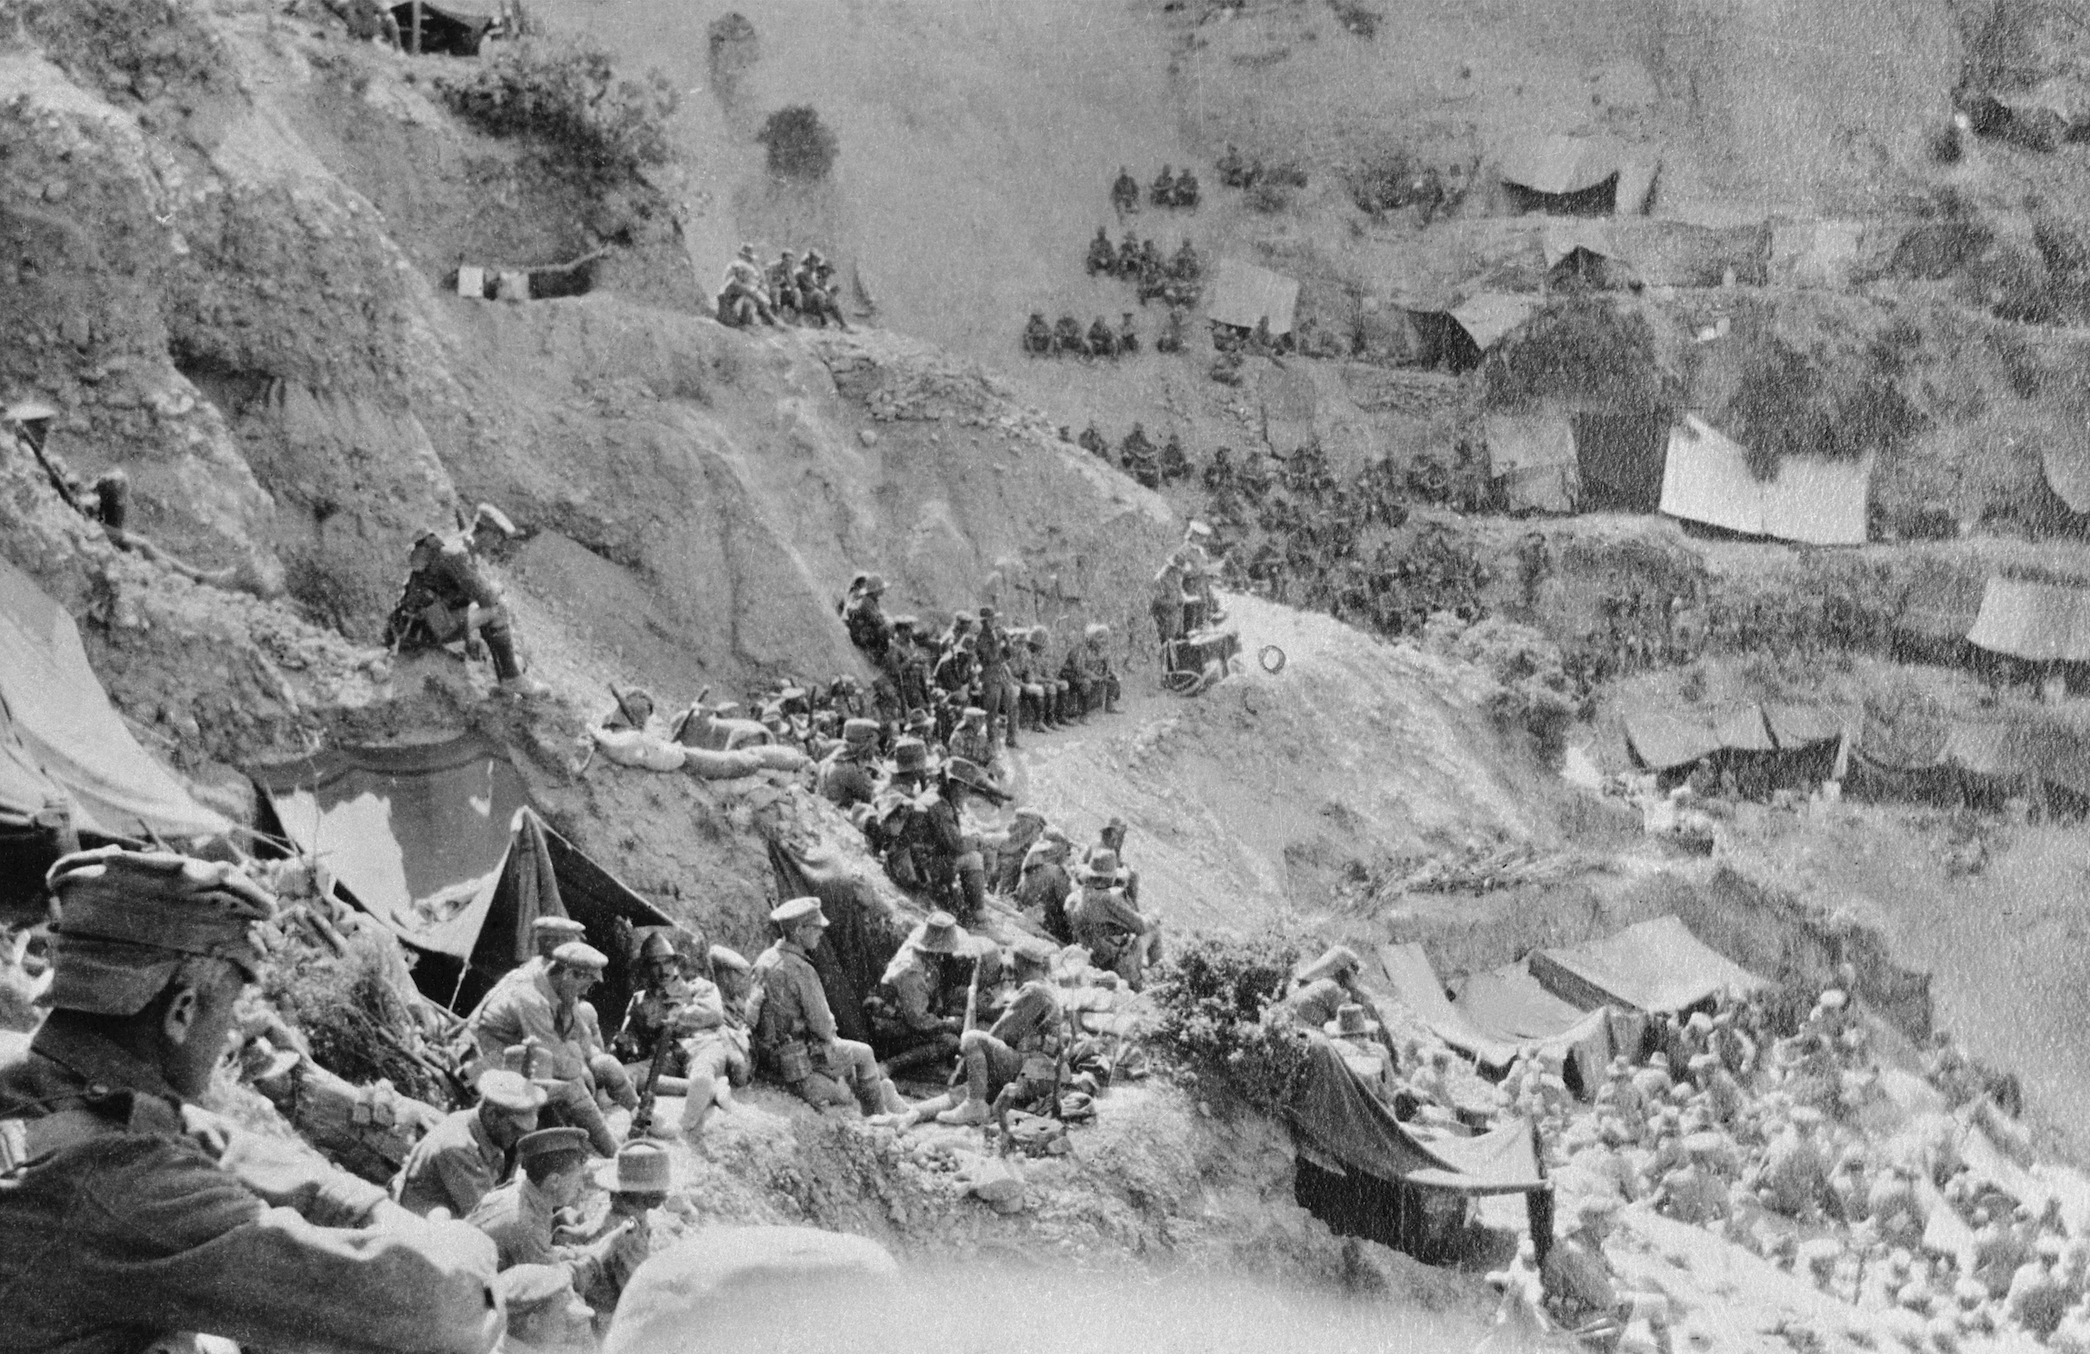 Soldiers attending a church service in Reserve Gully in Gallipoli, being conducted by Chaplain Gillison